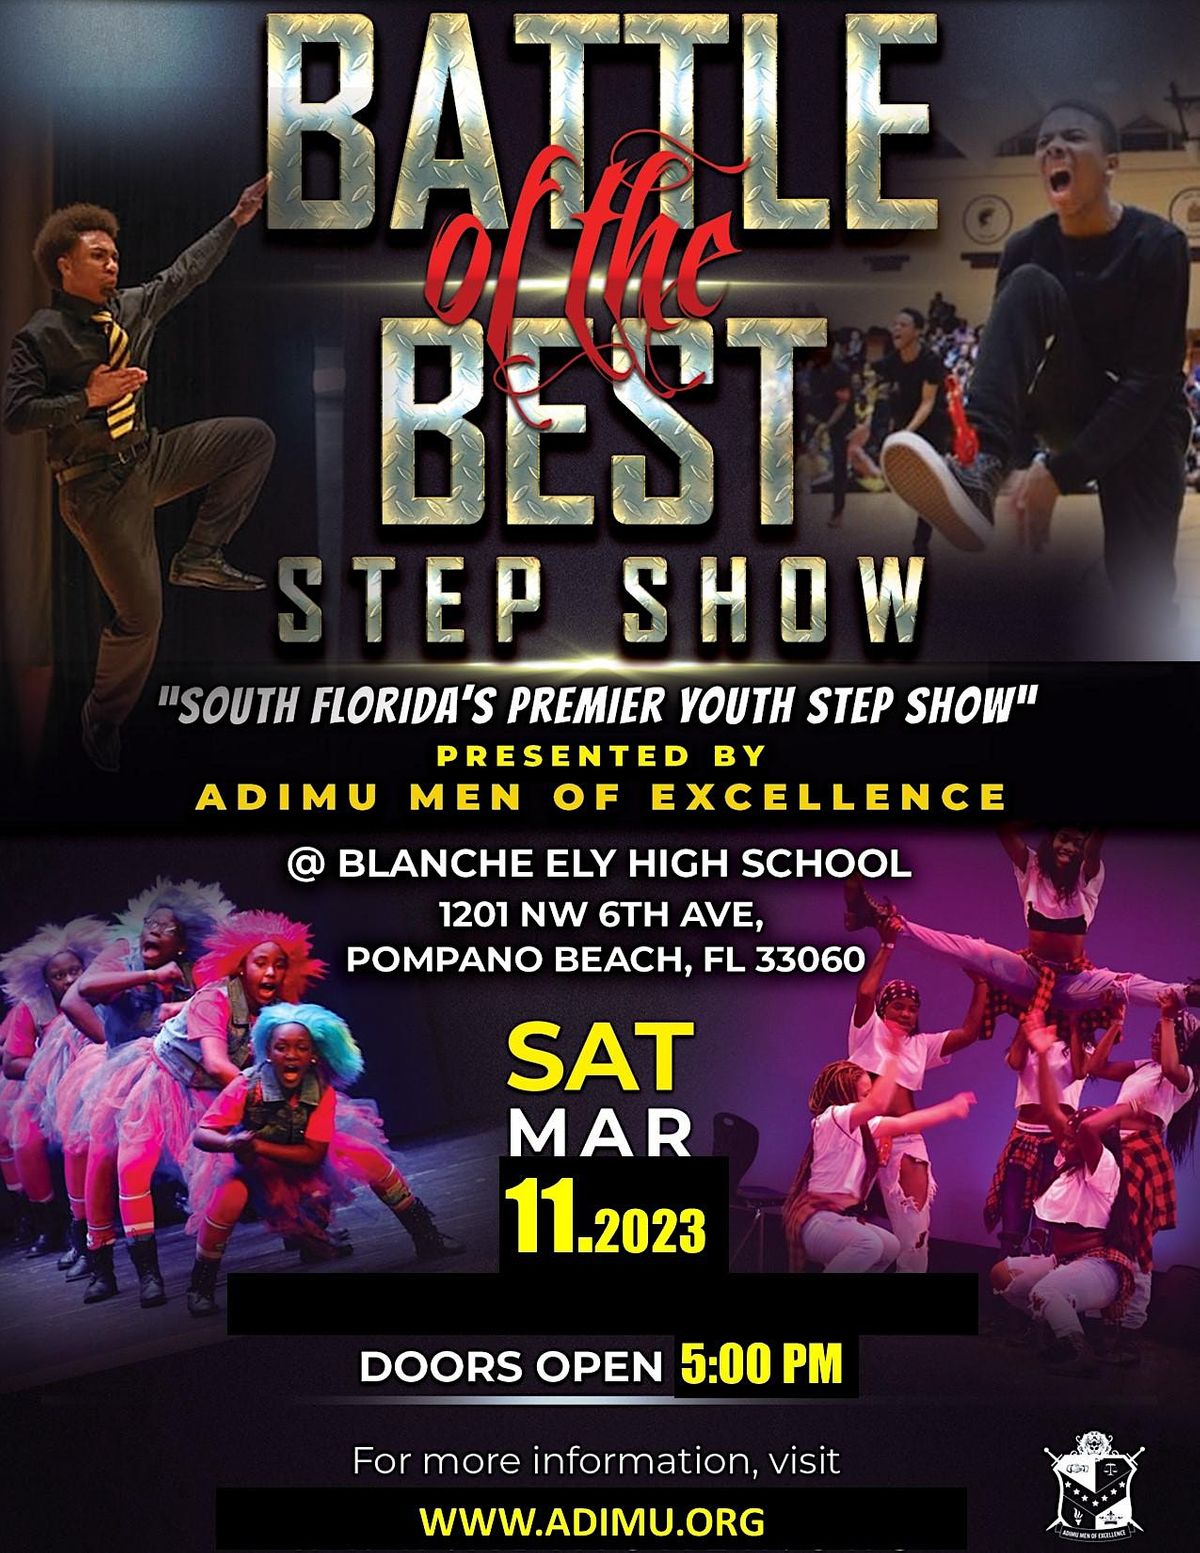 2023 Battle of the Best Step Show Blanche Ely High School, Pompano